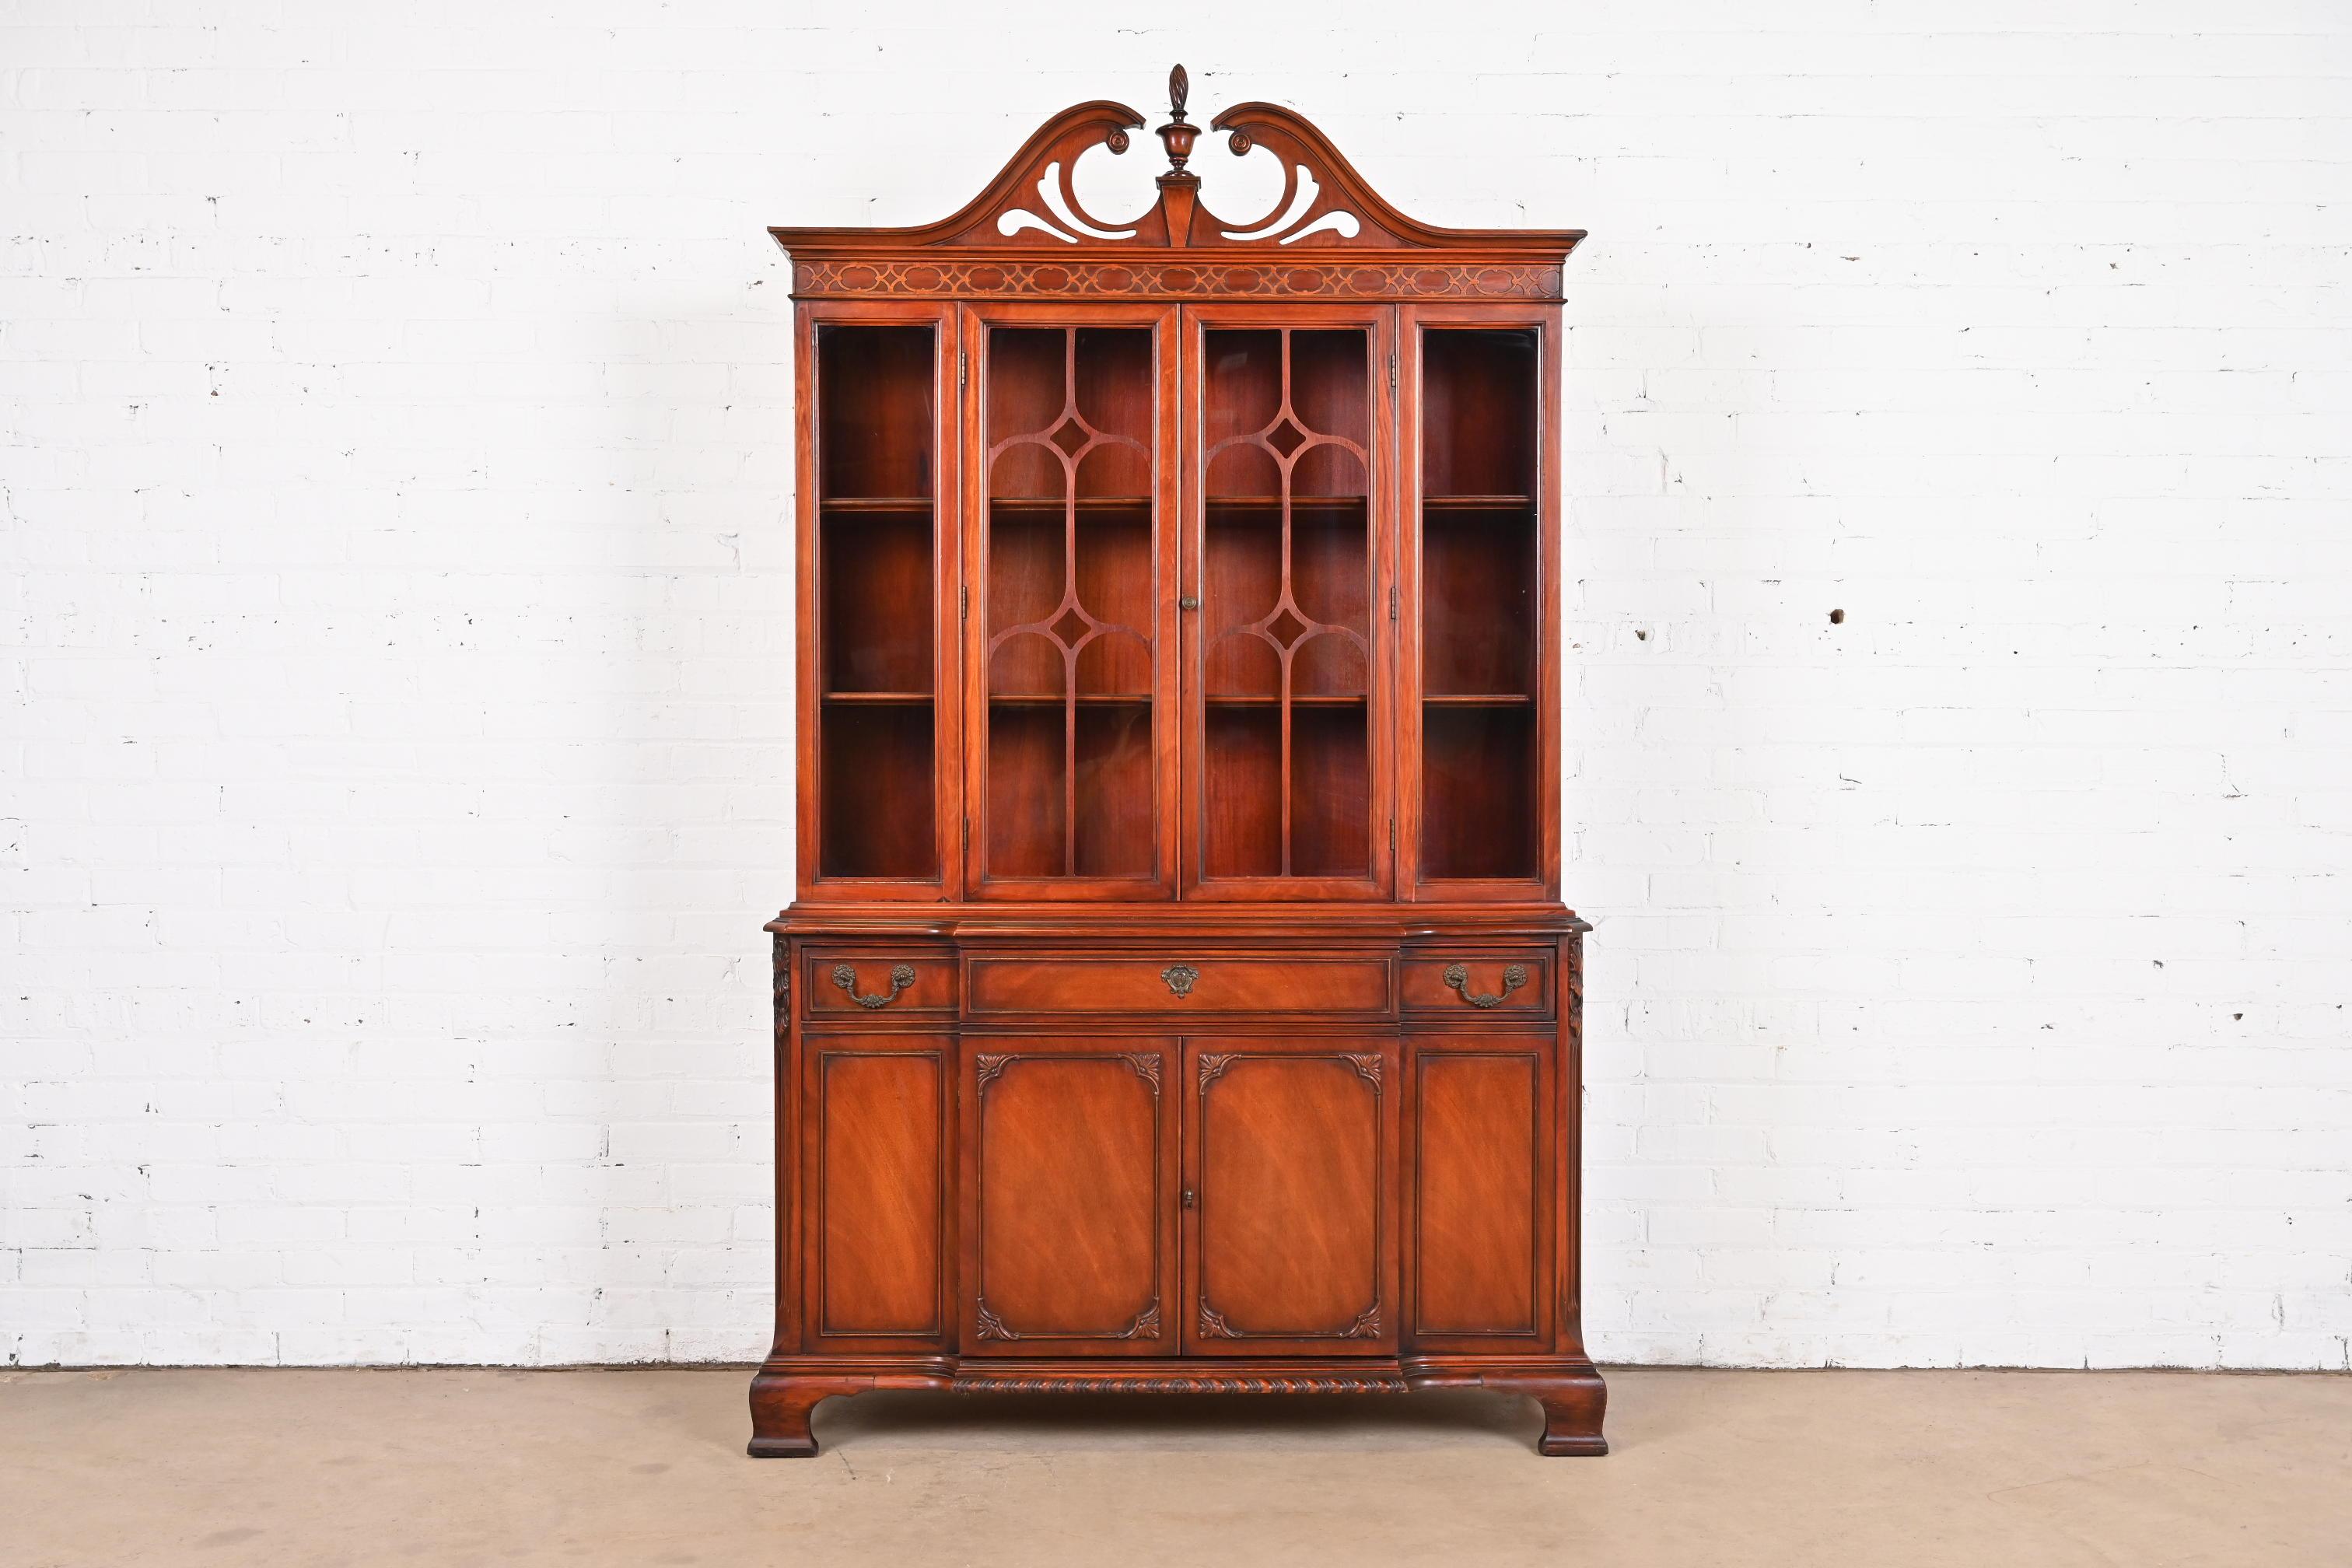 A gorgeous Georgian or Chippendale style breakfront bookcase or dining cabinet

By Bernhardt Furniture

USA, Mid-20th Century

Stunning carved mahogany, with mullioned glass front doors, and original brass hardware.

Measures: 48.75